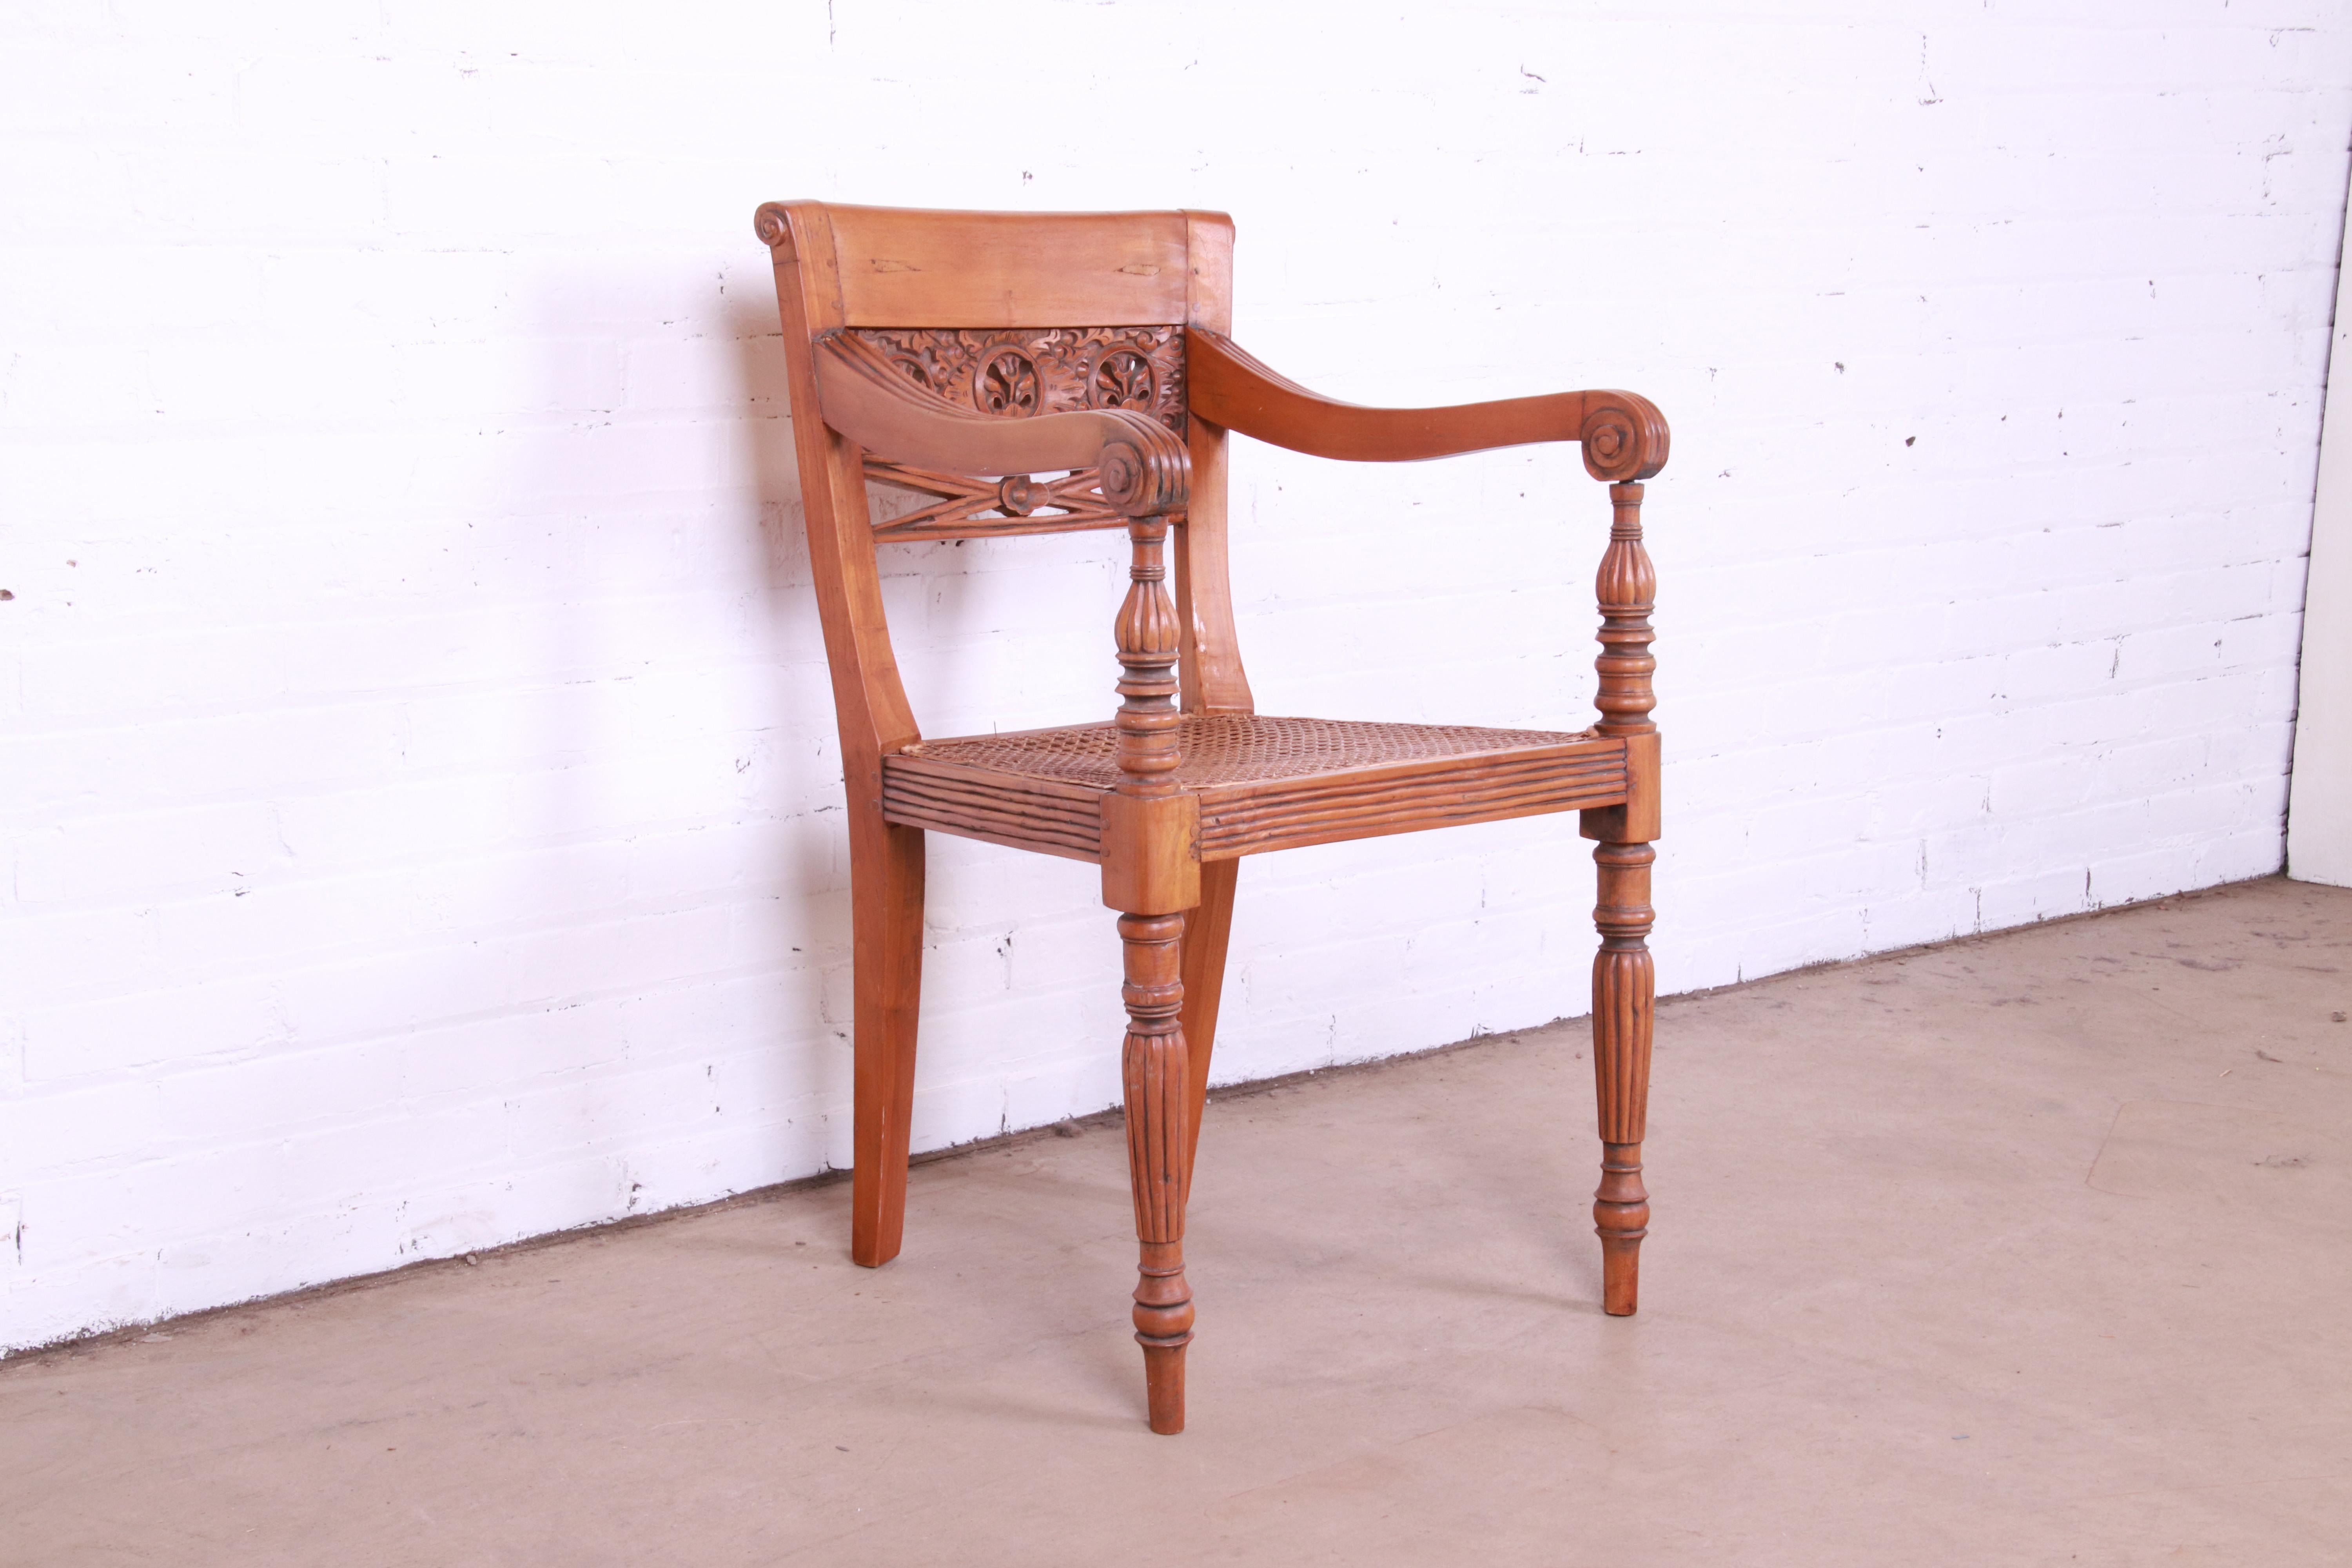 A beautiful Regency style desk chair or side chair

Circa 1940s

Carved walnut, with caned seat.

Measures: 22